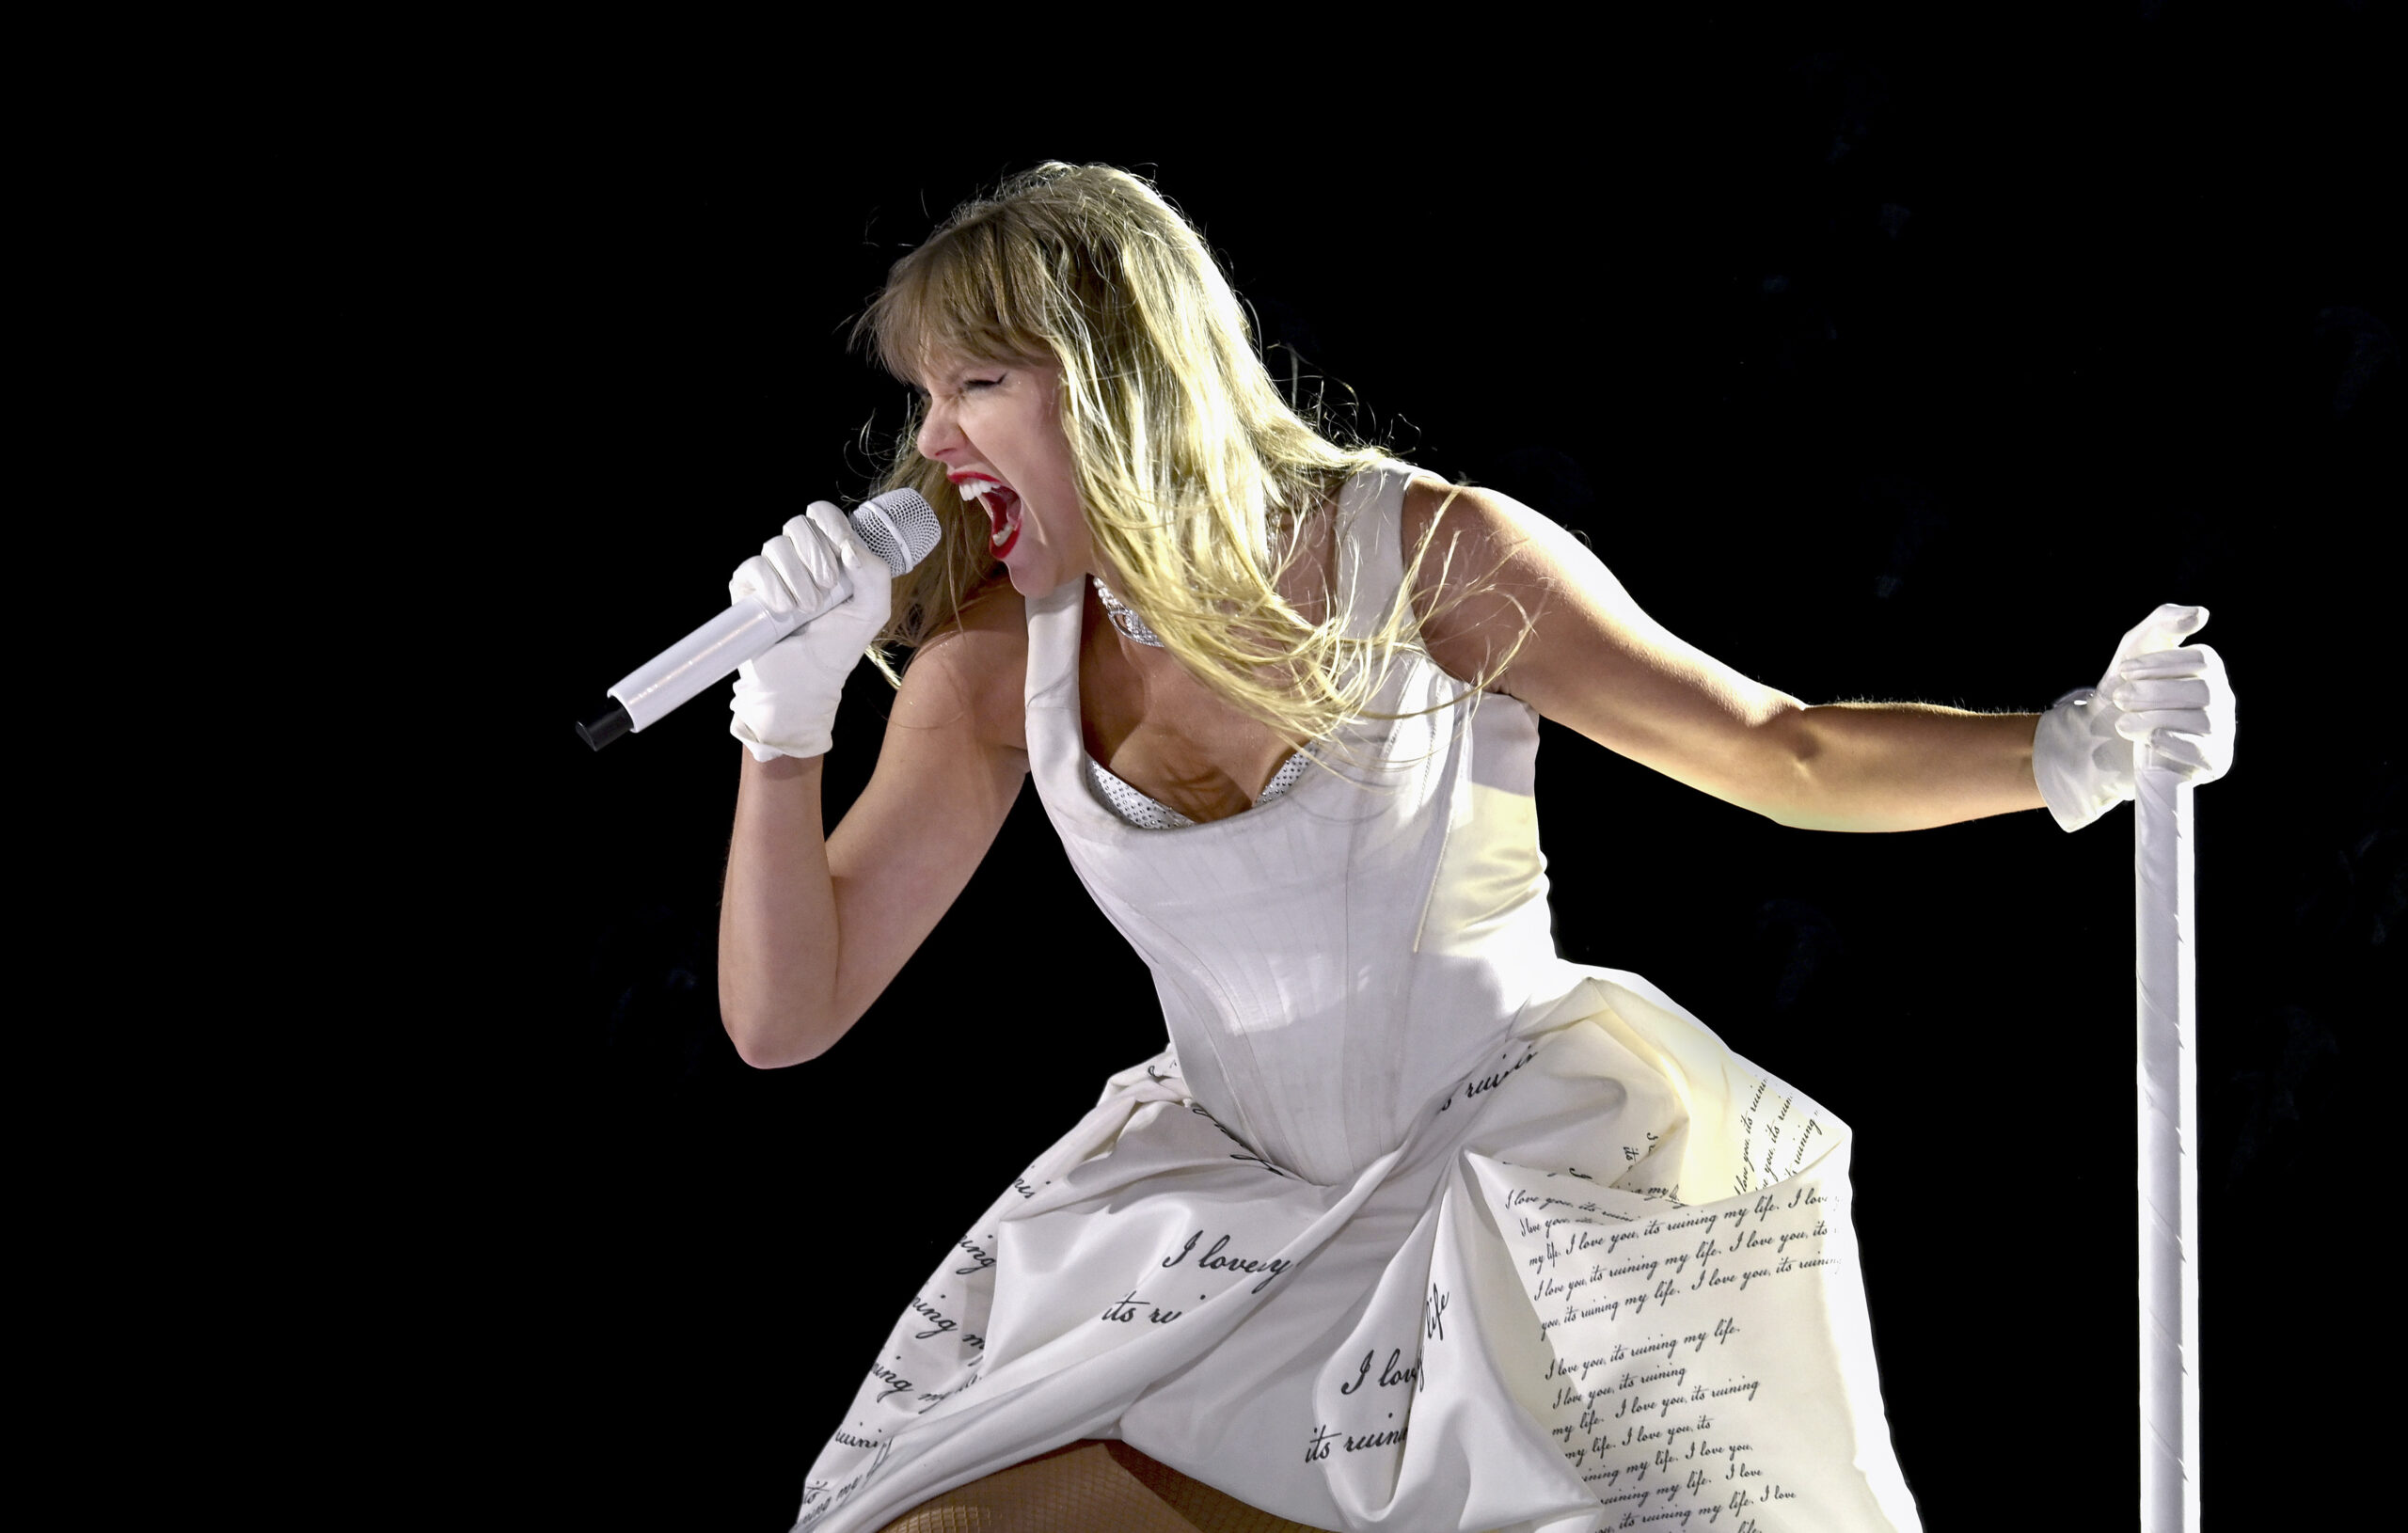 Taylor Swift Fans’ Dancing Caused Seismic Activity in Scotland